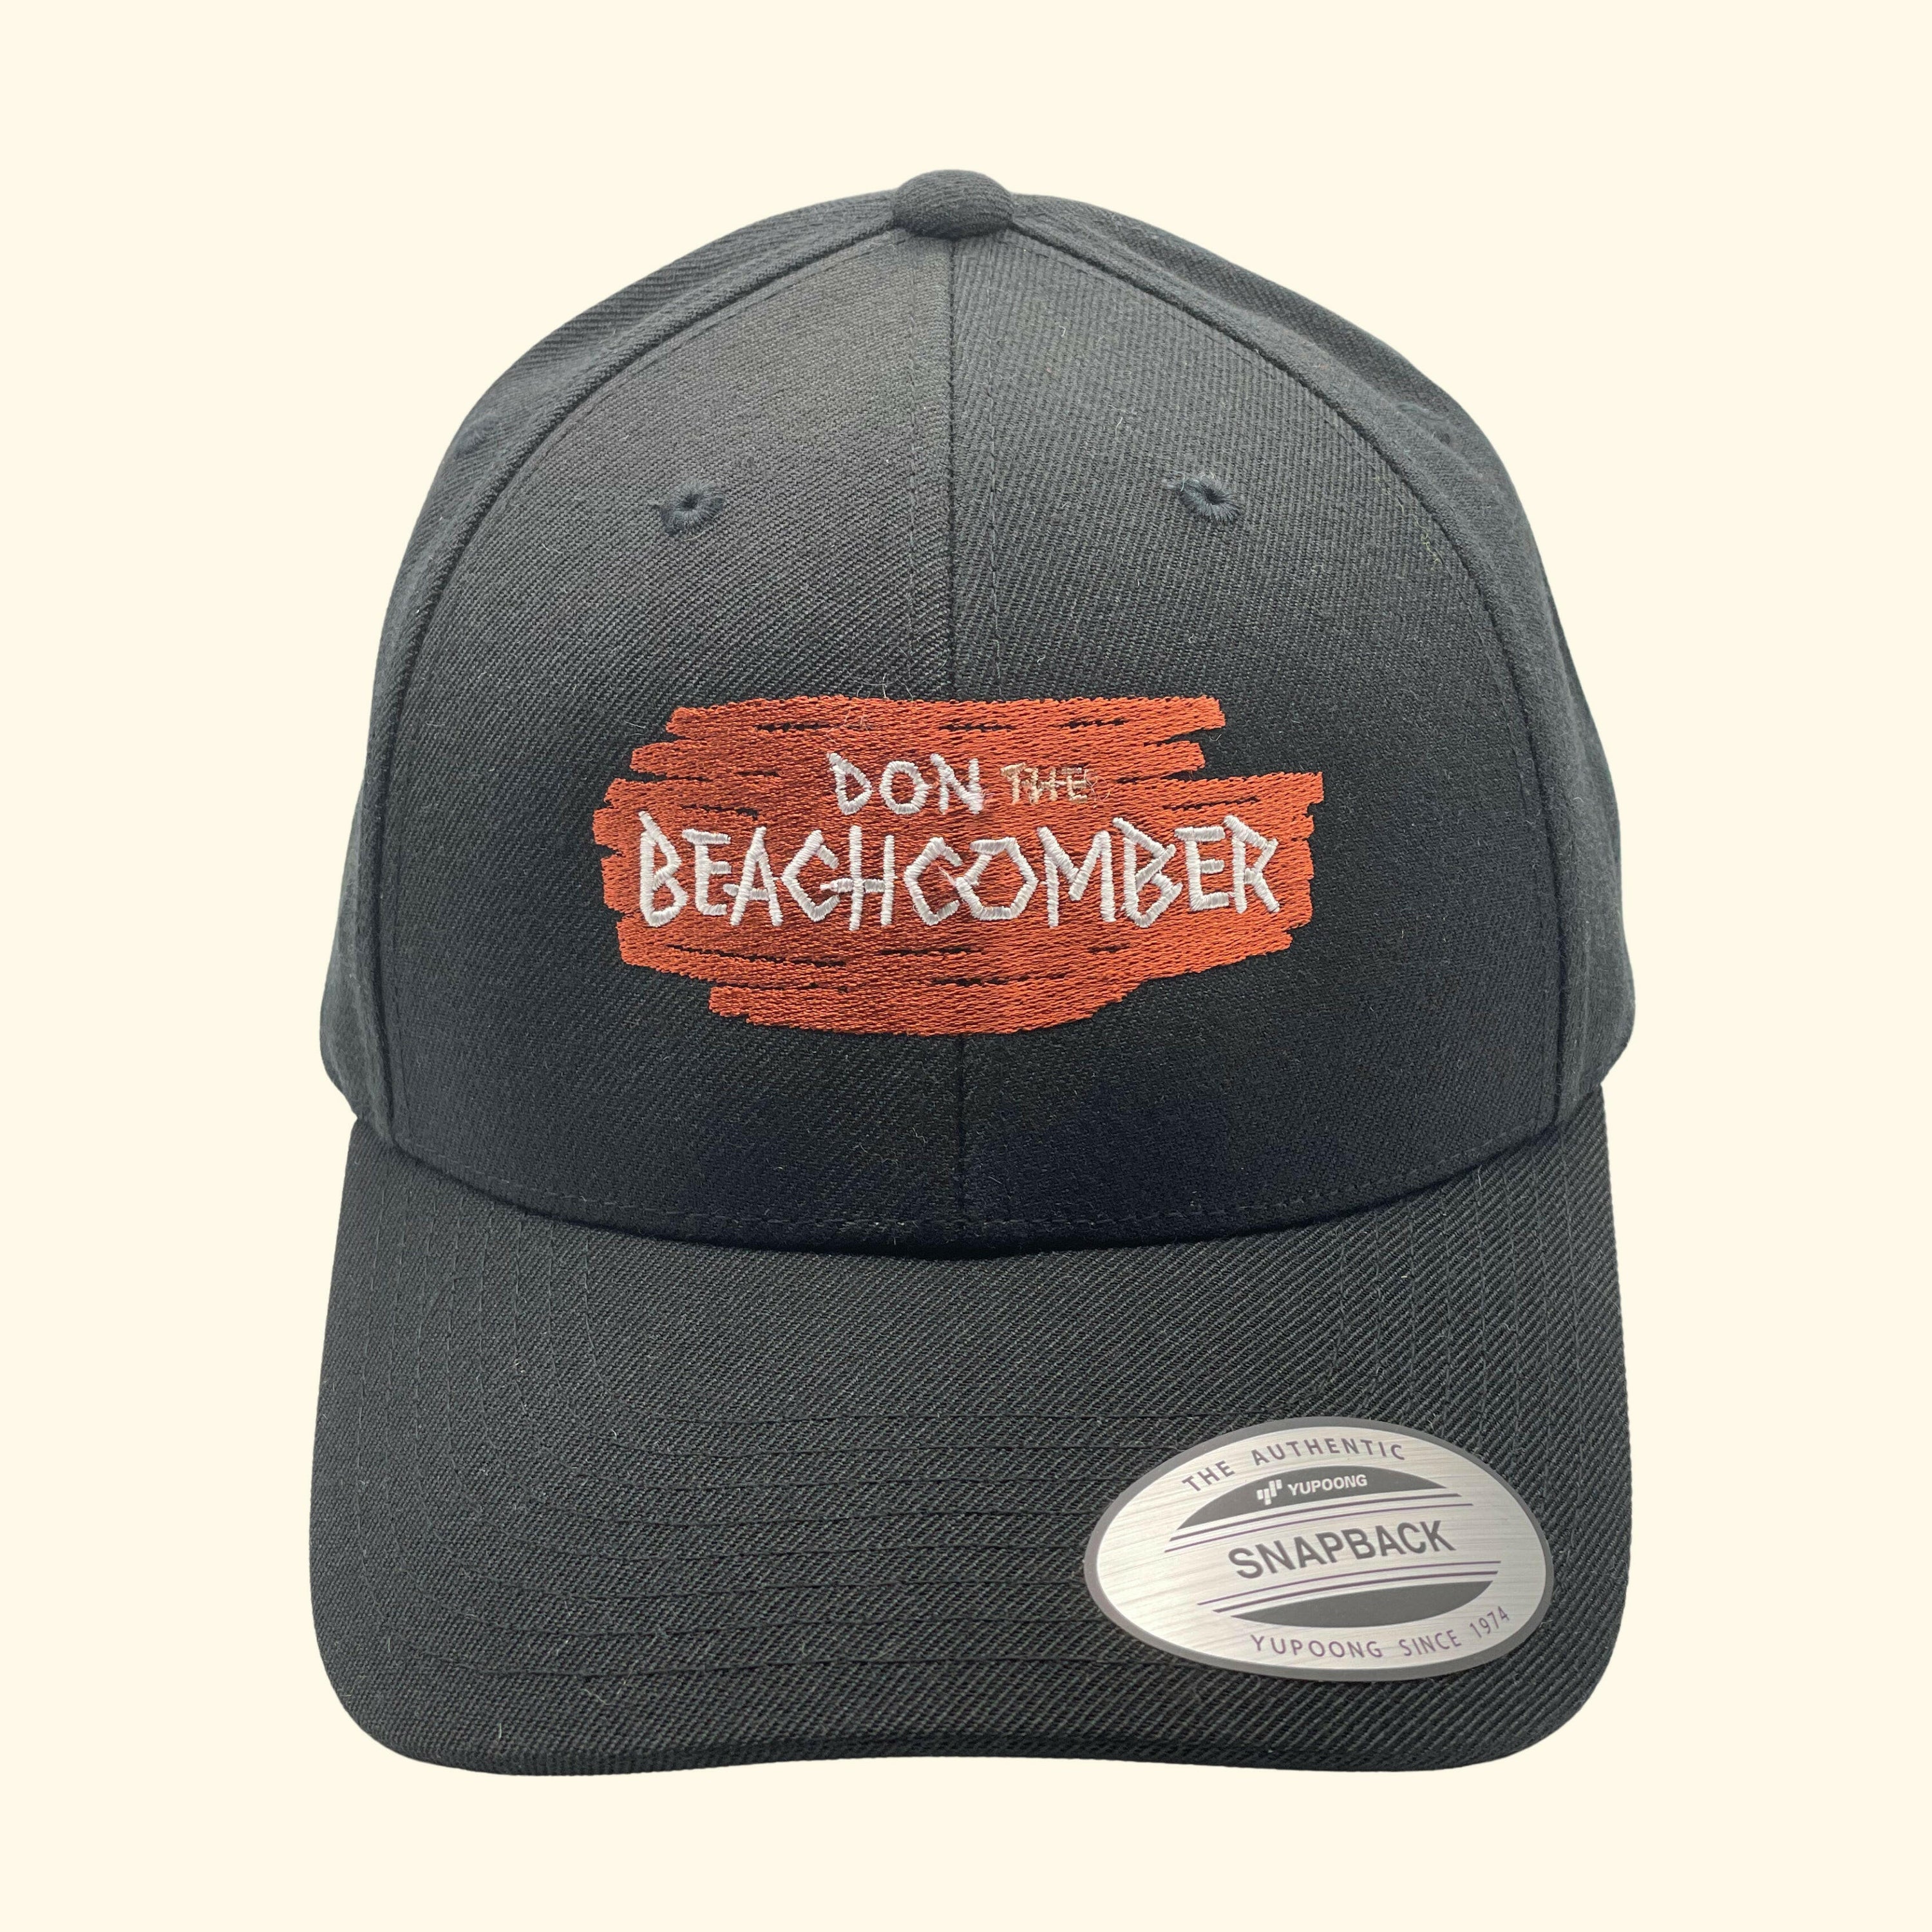 Don the Beachcomber Embroidered Logo Premium Curved Bill Black Snapback Cap